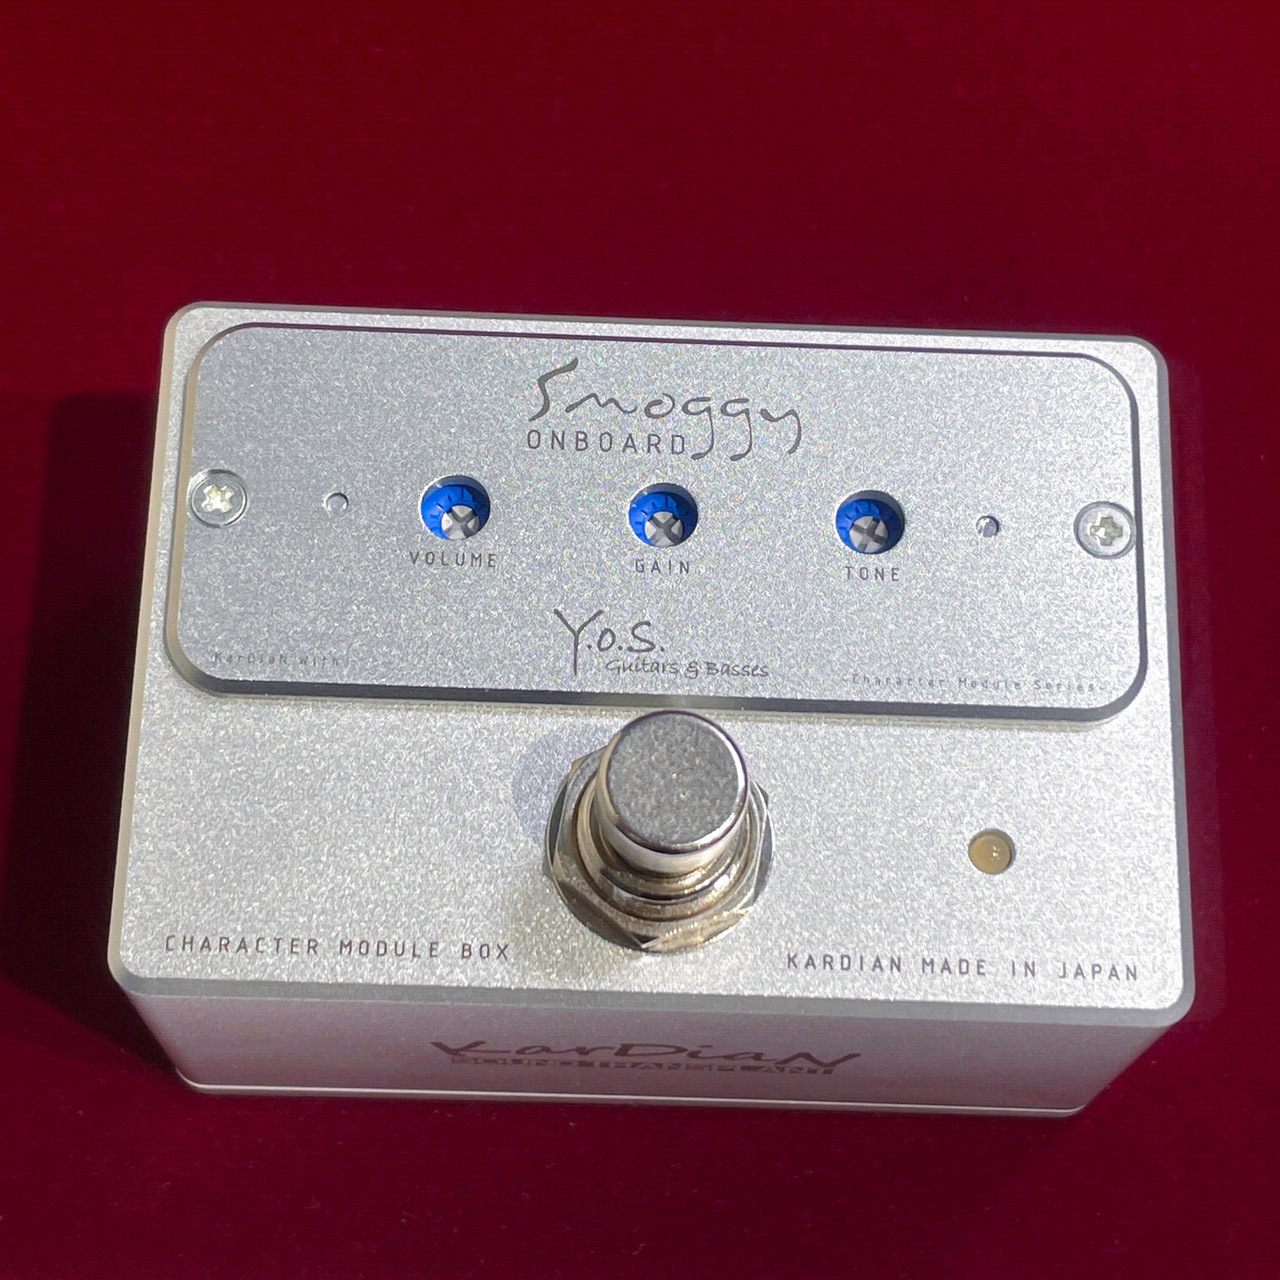 Y.O.S.ギター工房 Smoggy Onboard & Character Module Box 【セット 